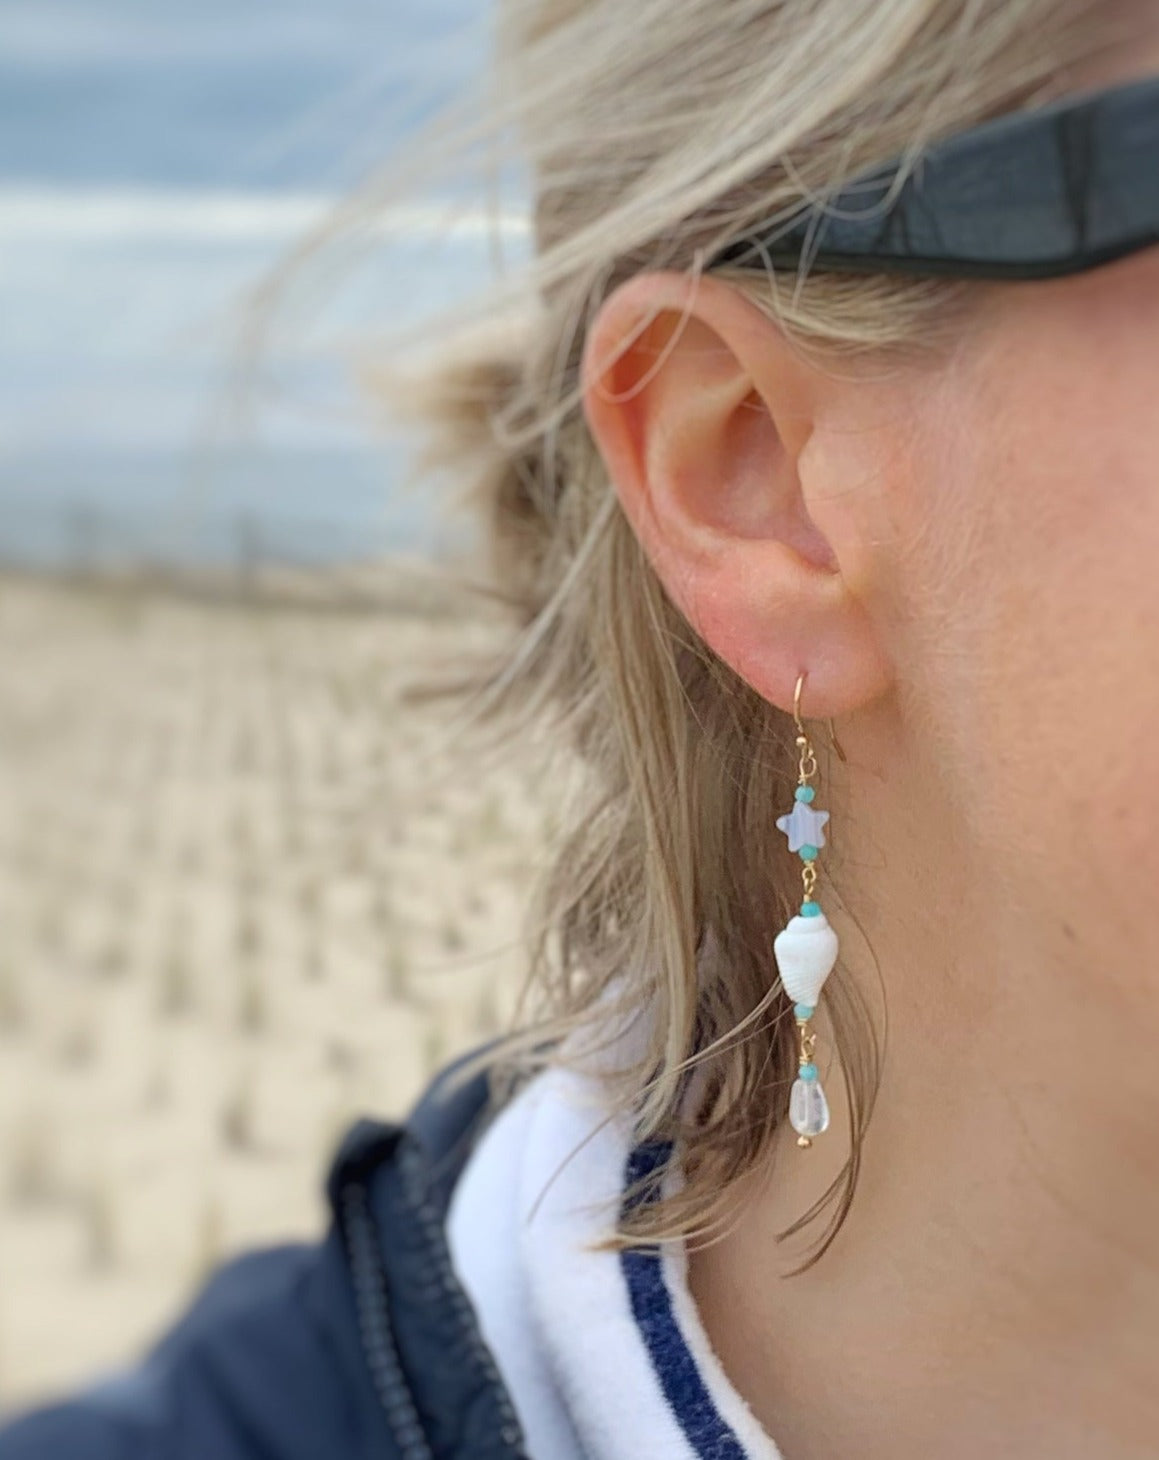 The Island Hopper earrings are photographed close up on a woman at the beach with focus on the earring The earrings are designed to be slightly asymmetrical. The earrings are created with 14k gold filled findings and wire, both end with an irregular shape of rose quartz, have a shell in the center of the earring but the first bead on each earring is different. One has a star shaped blue lace agate bead, and the other started with a rough faceted Peruvian opal rondelle. 